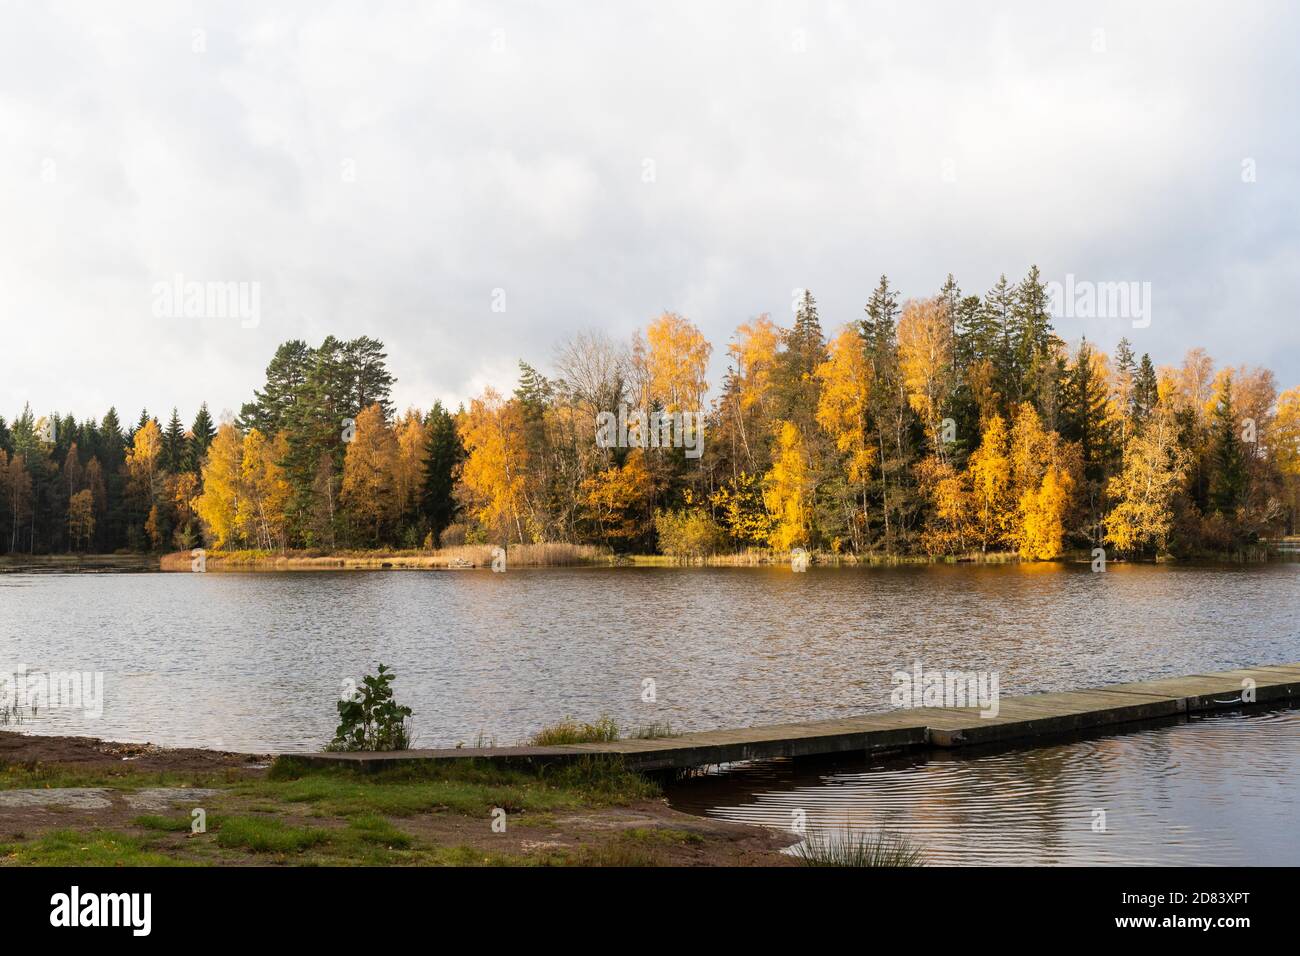 Colorful autumnal scene by a lake in the swedish province Smaland Stock Photo